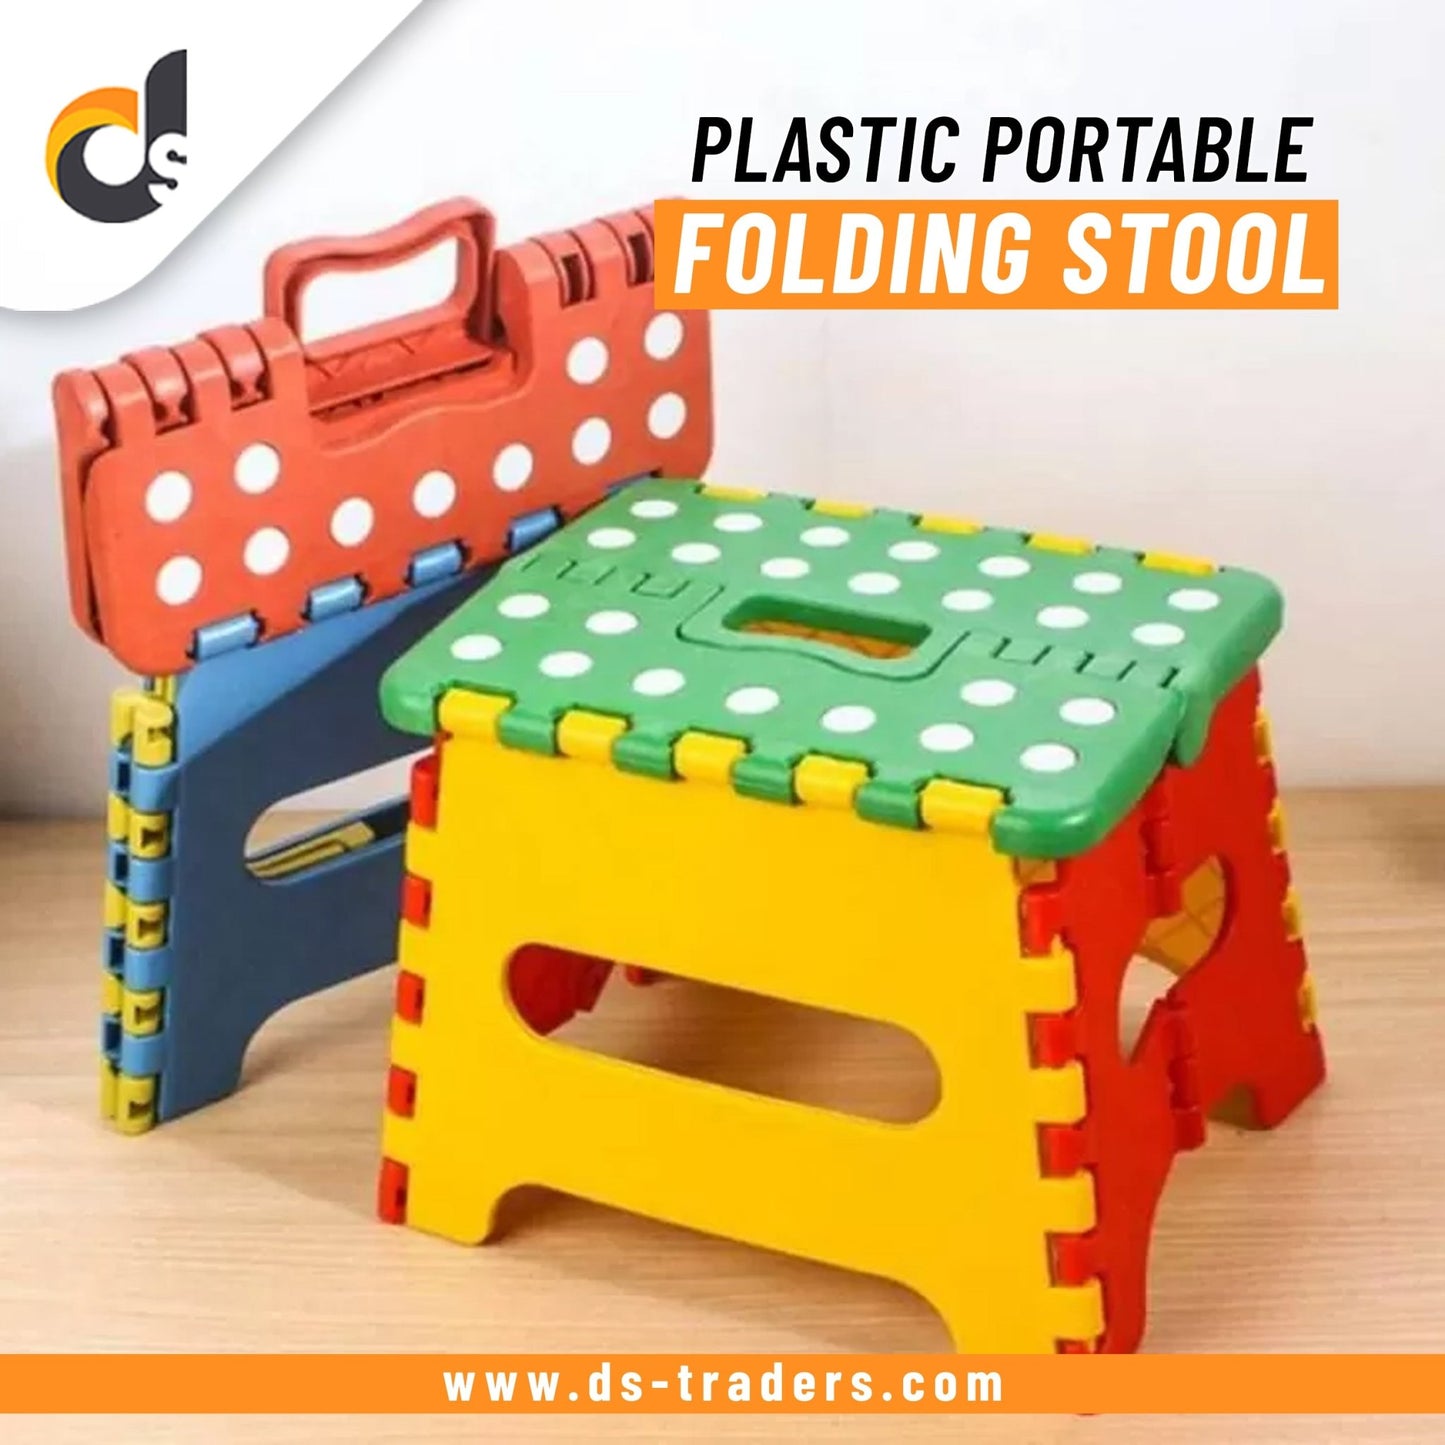 Plastic Portable Folding Stool for Kids - DS Traders